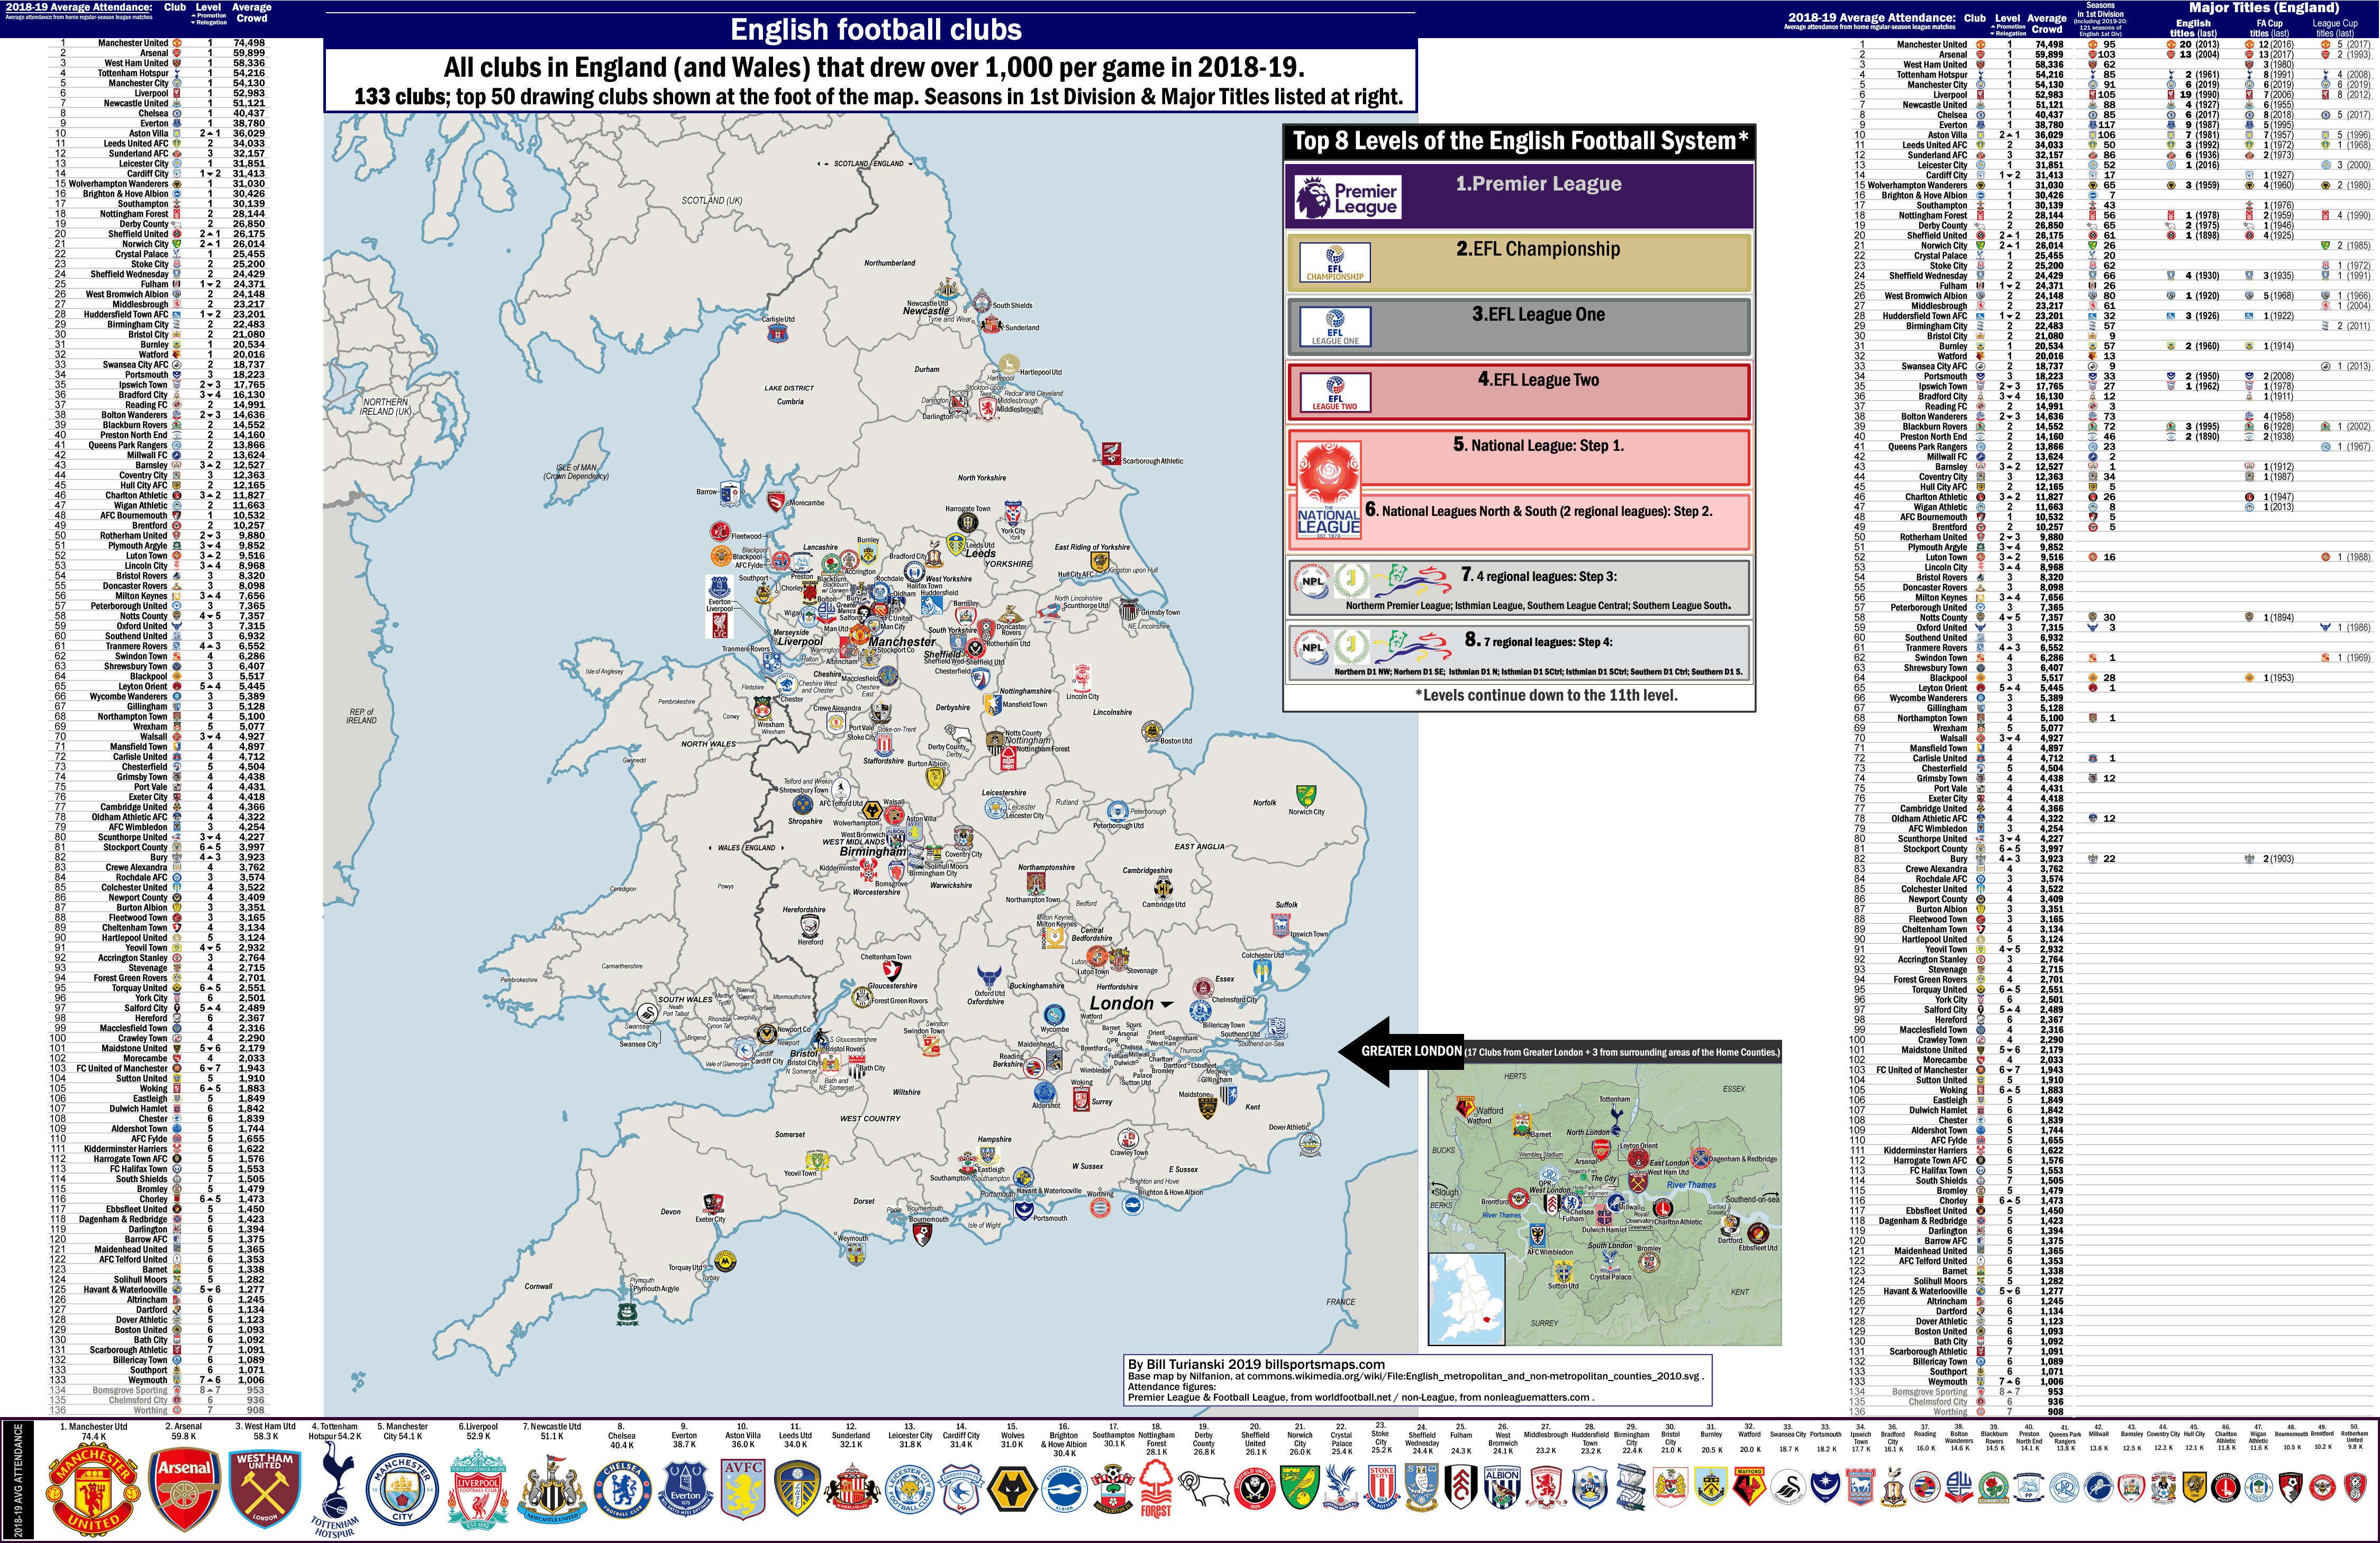 football teams in england map England Including Wales Map Of All Football Clubs Drawing football teams in england map